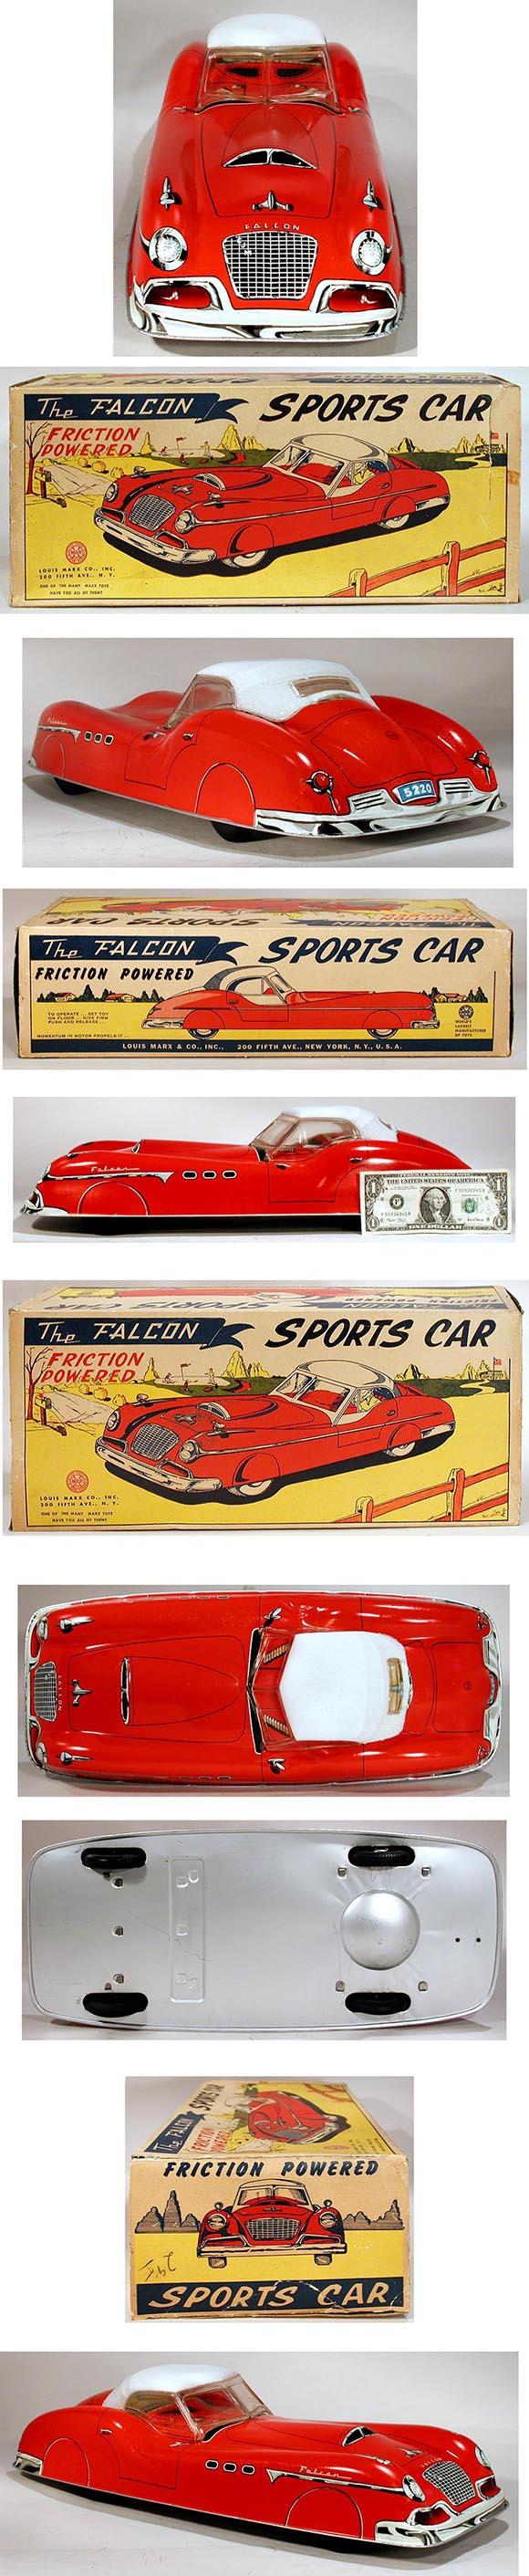 1956 Marx The Falcon Friction Powered Sports Car (Red) in Original Box